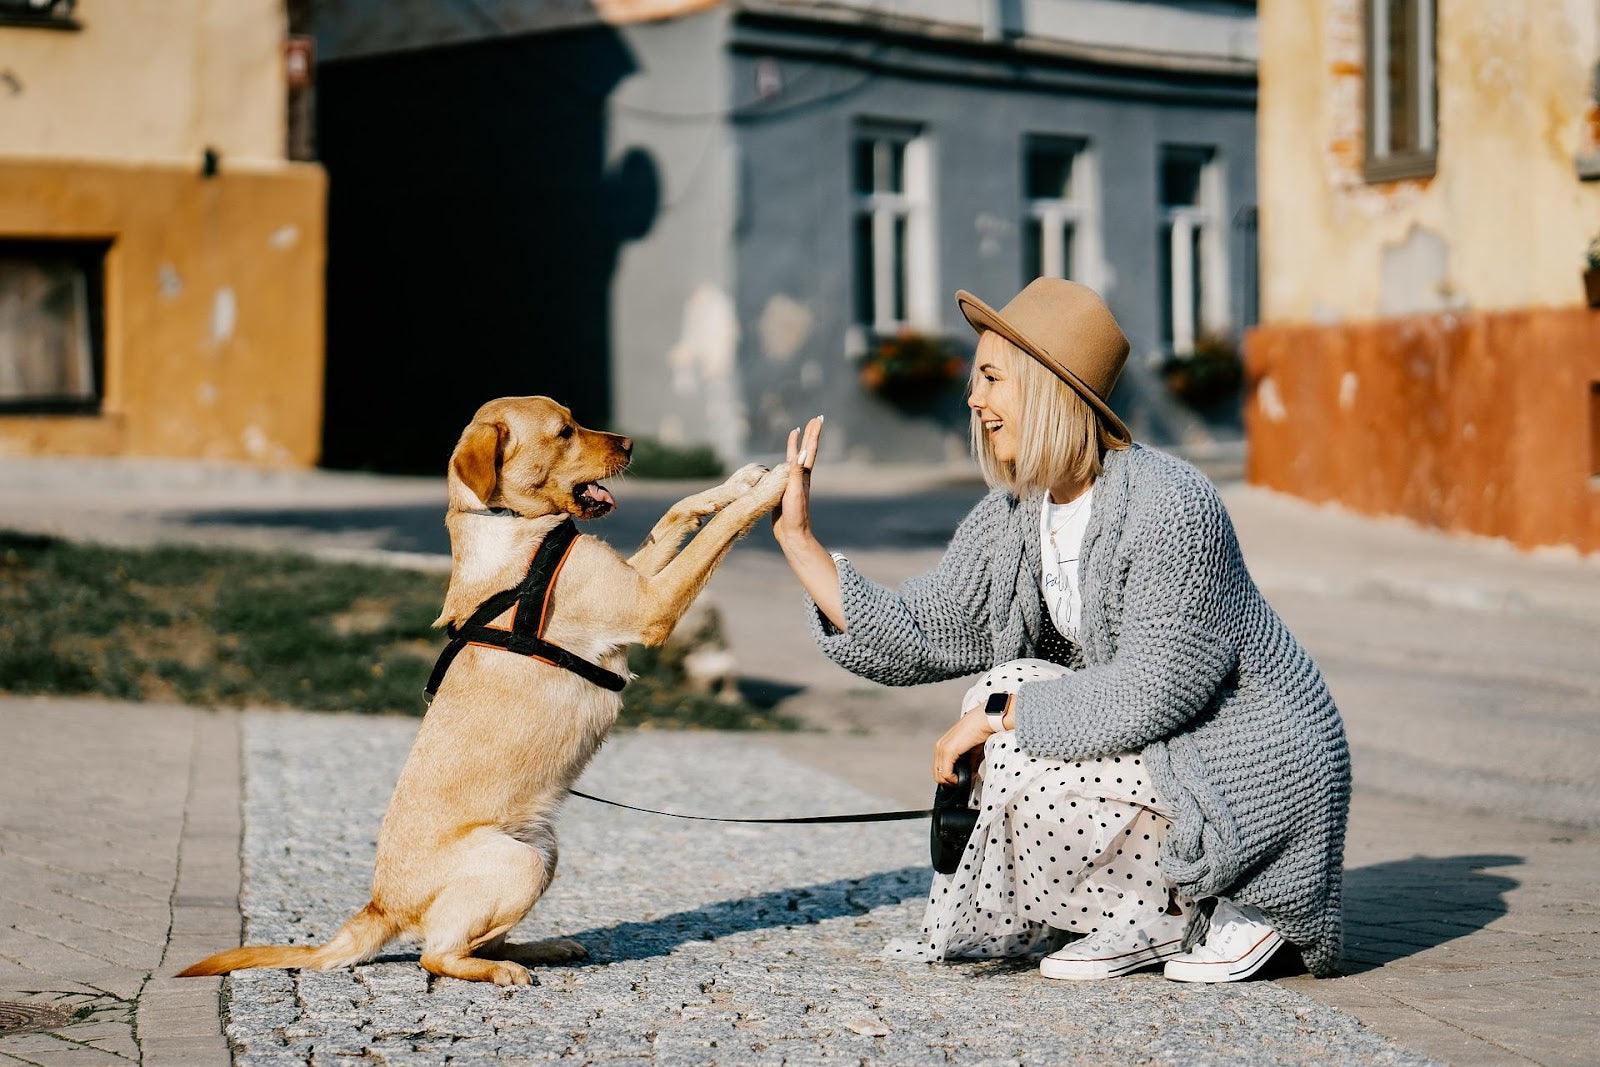 A person and their dog giving a high five outside on the sidewalk.